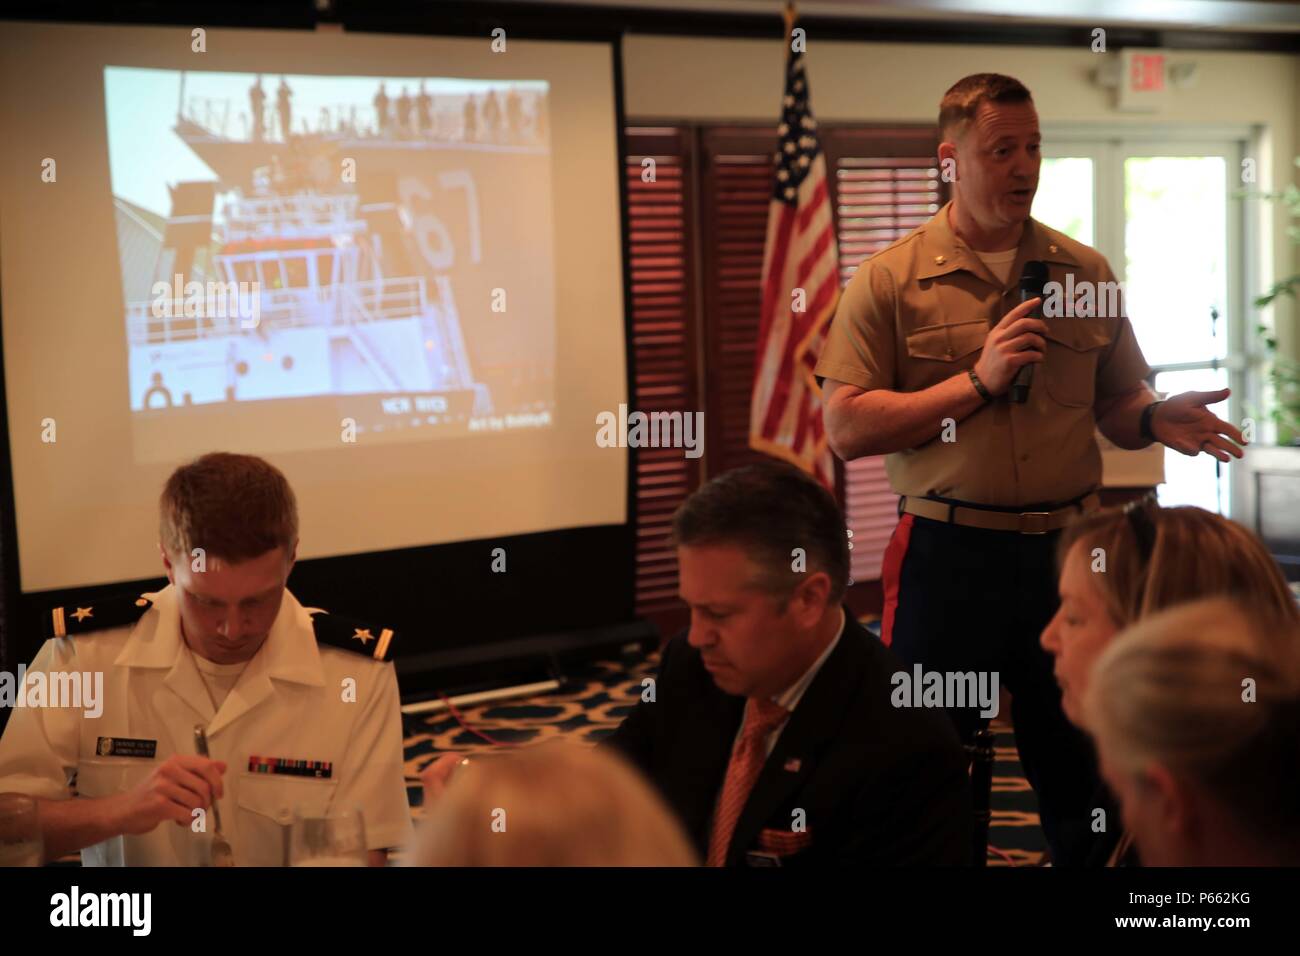 Maj. Andre LaTaste, the Marine Forces Command programming officer, speaks during the Port Everglades Association Luncheon as part of Fleet Week Port Everglades, Fort Lauderdale, Fla., May 6, 2016. Fleet Week will give the community of South Florida the opportunity to interact with the Marines and Sailors of the ship as well as see up-close and personal some of the capabilities and equipment the Marine Corps employs. (U.S. Marine Corps photo by Lance Cpl. Brianna Gaudi/Released.) Stock Photo